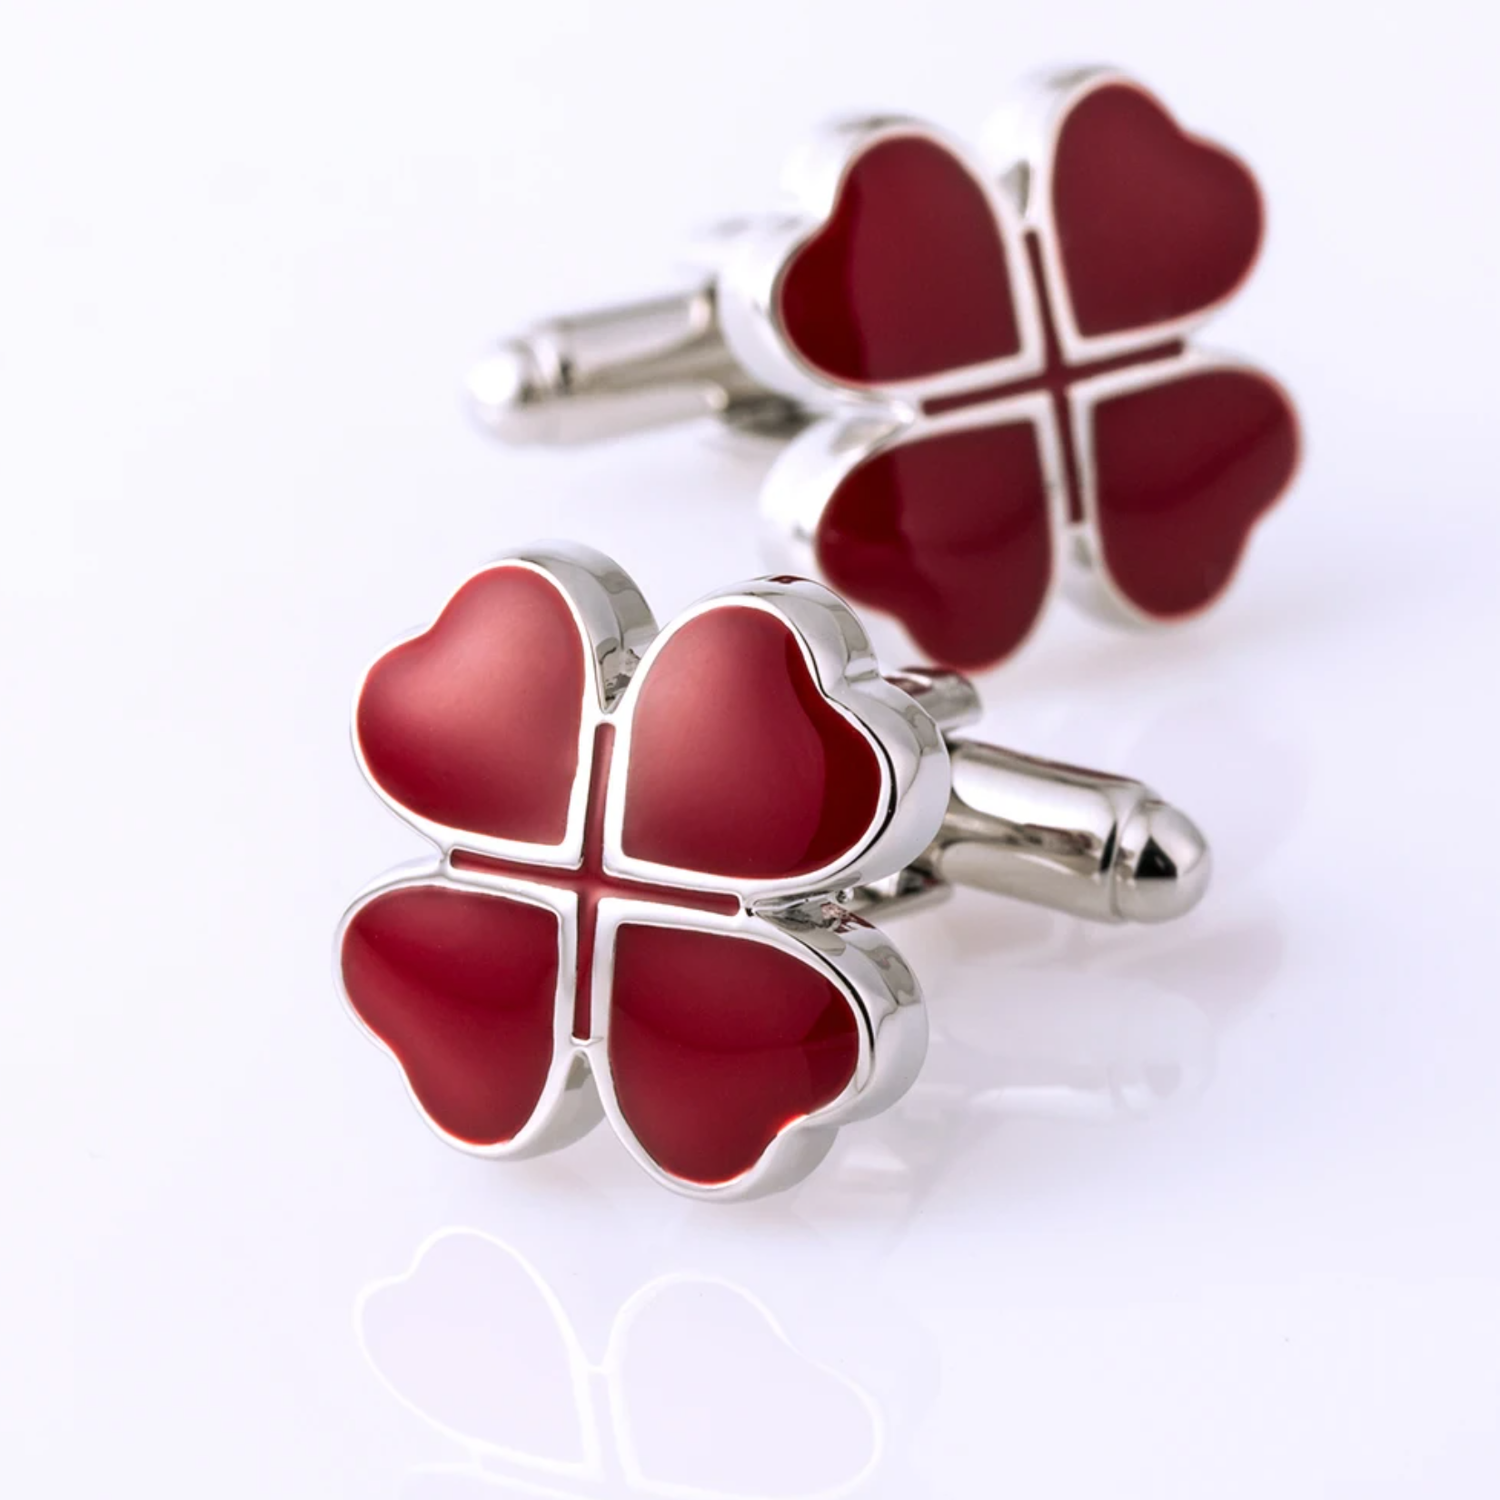 View 2: Red with Chrome Clover Cufflinks